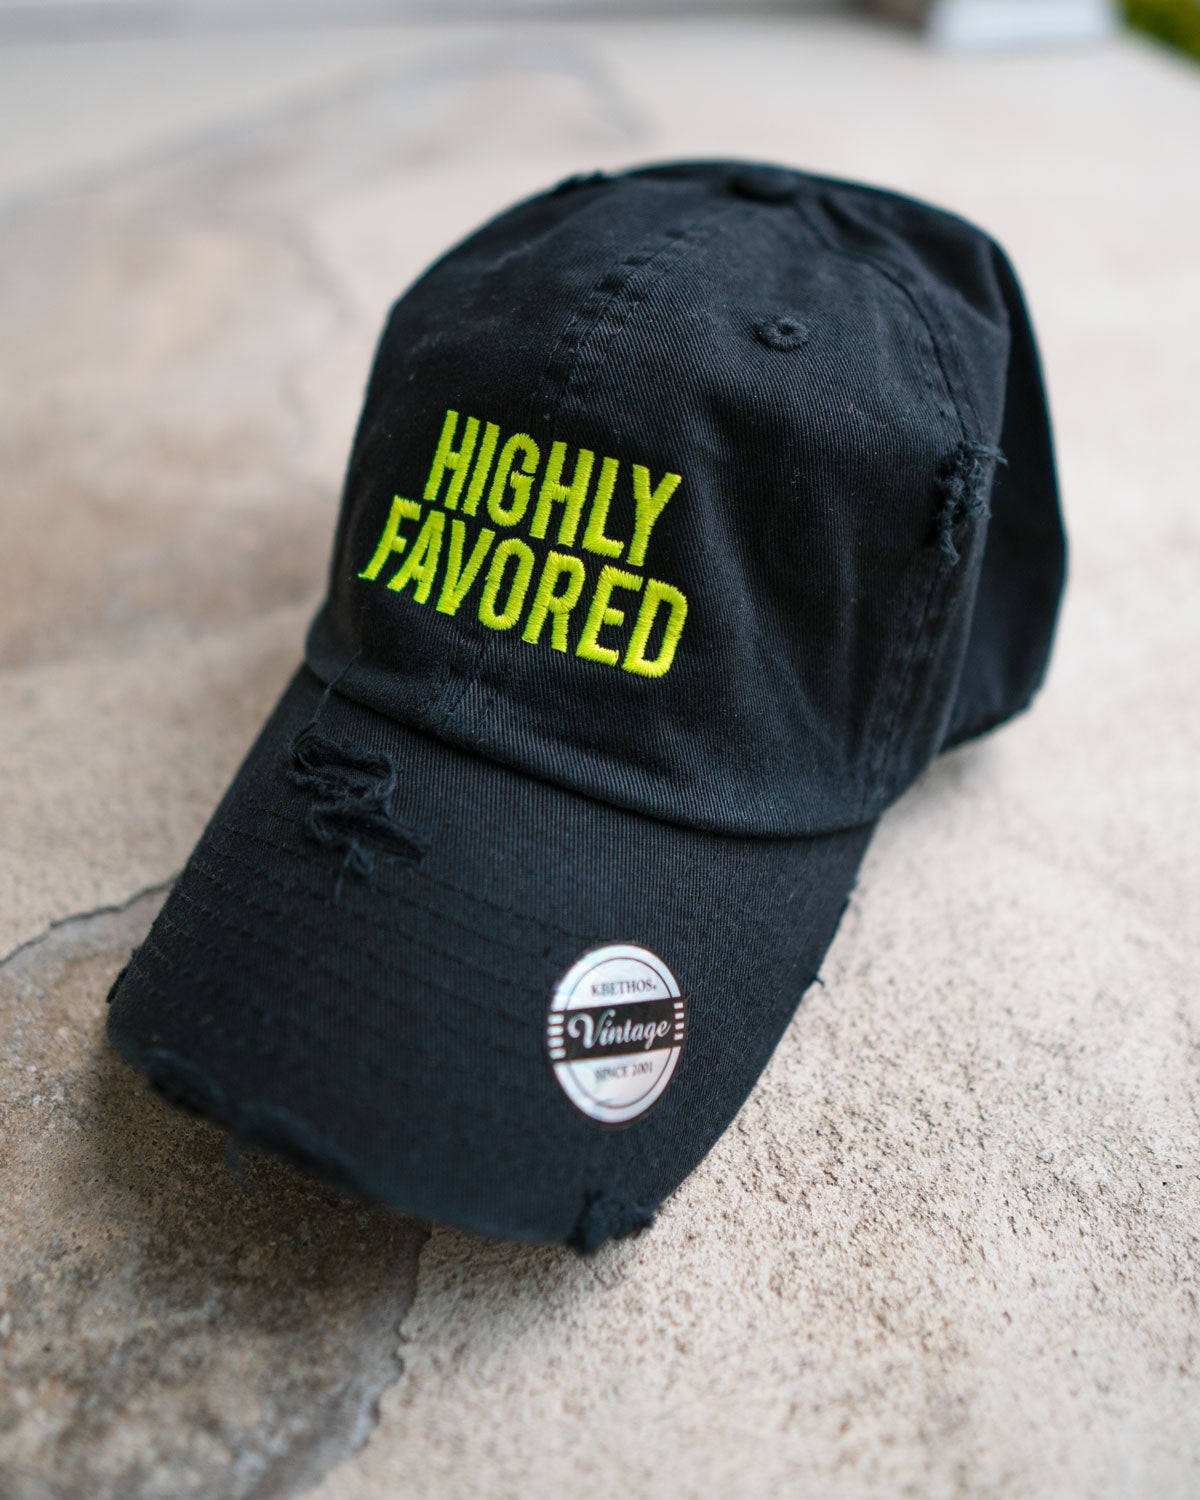 Highly Favored Hat (Distressed)